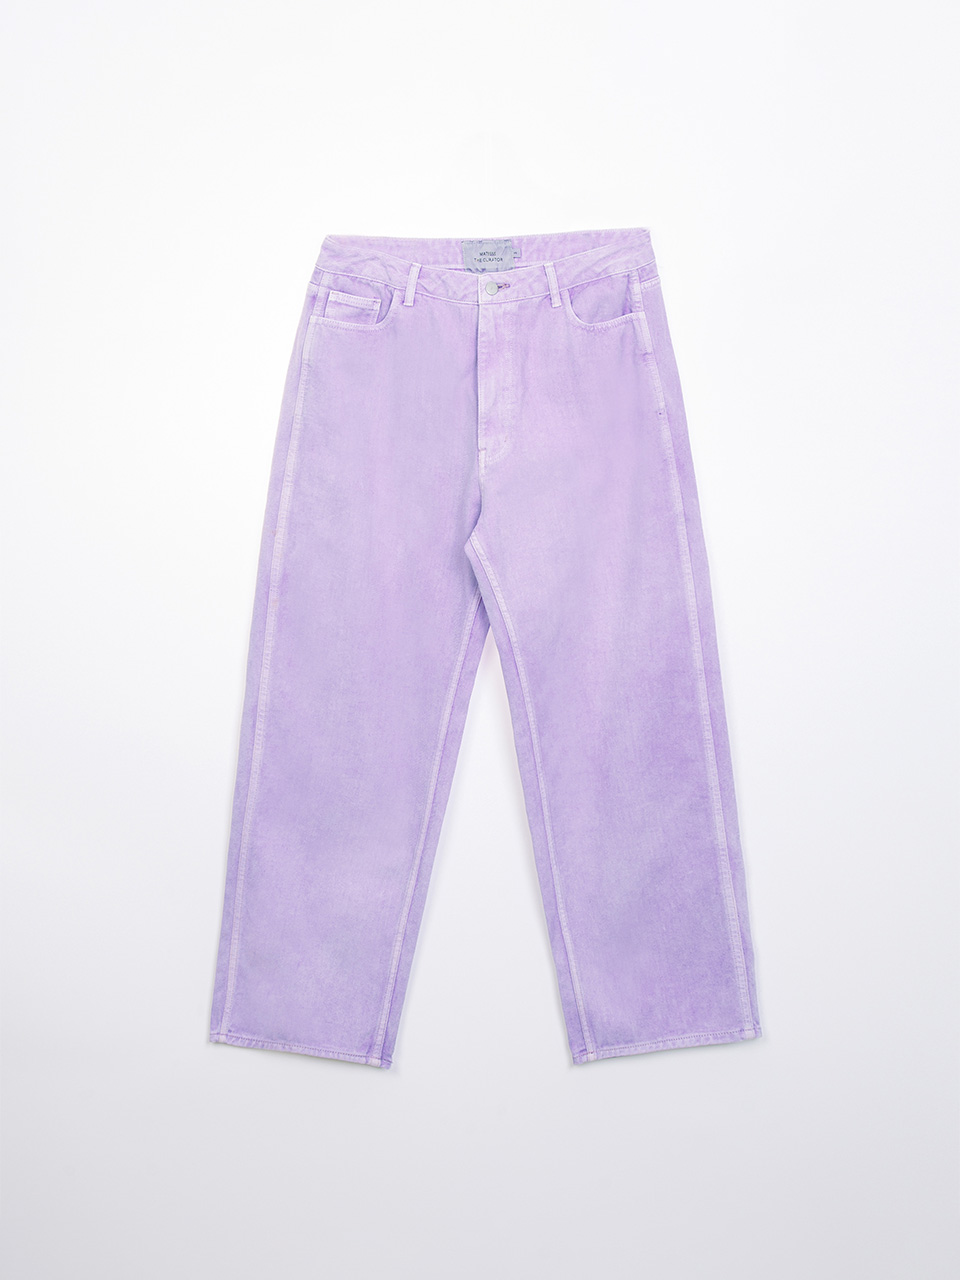 MATISSE THE CURATOR - WIDE DYING DENIM PANTS (LIGHT PURPLE)